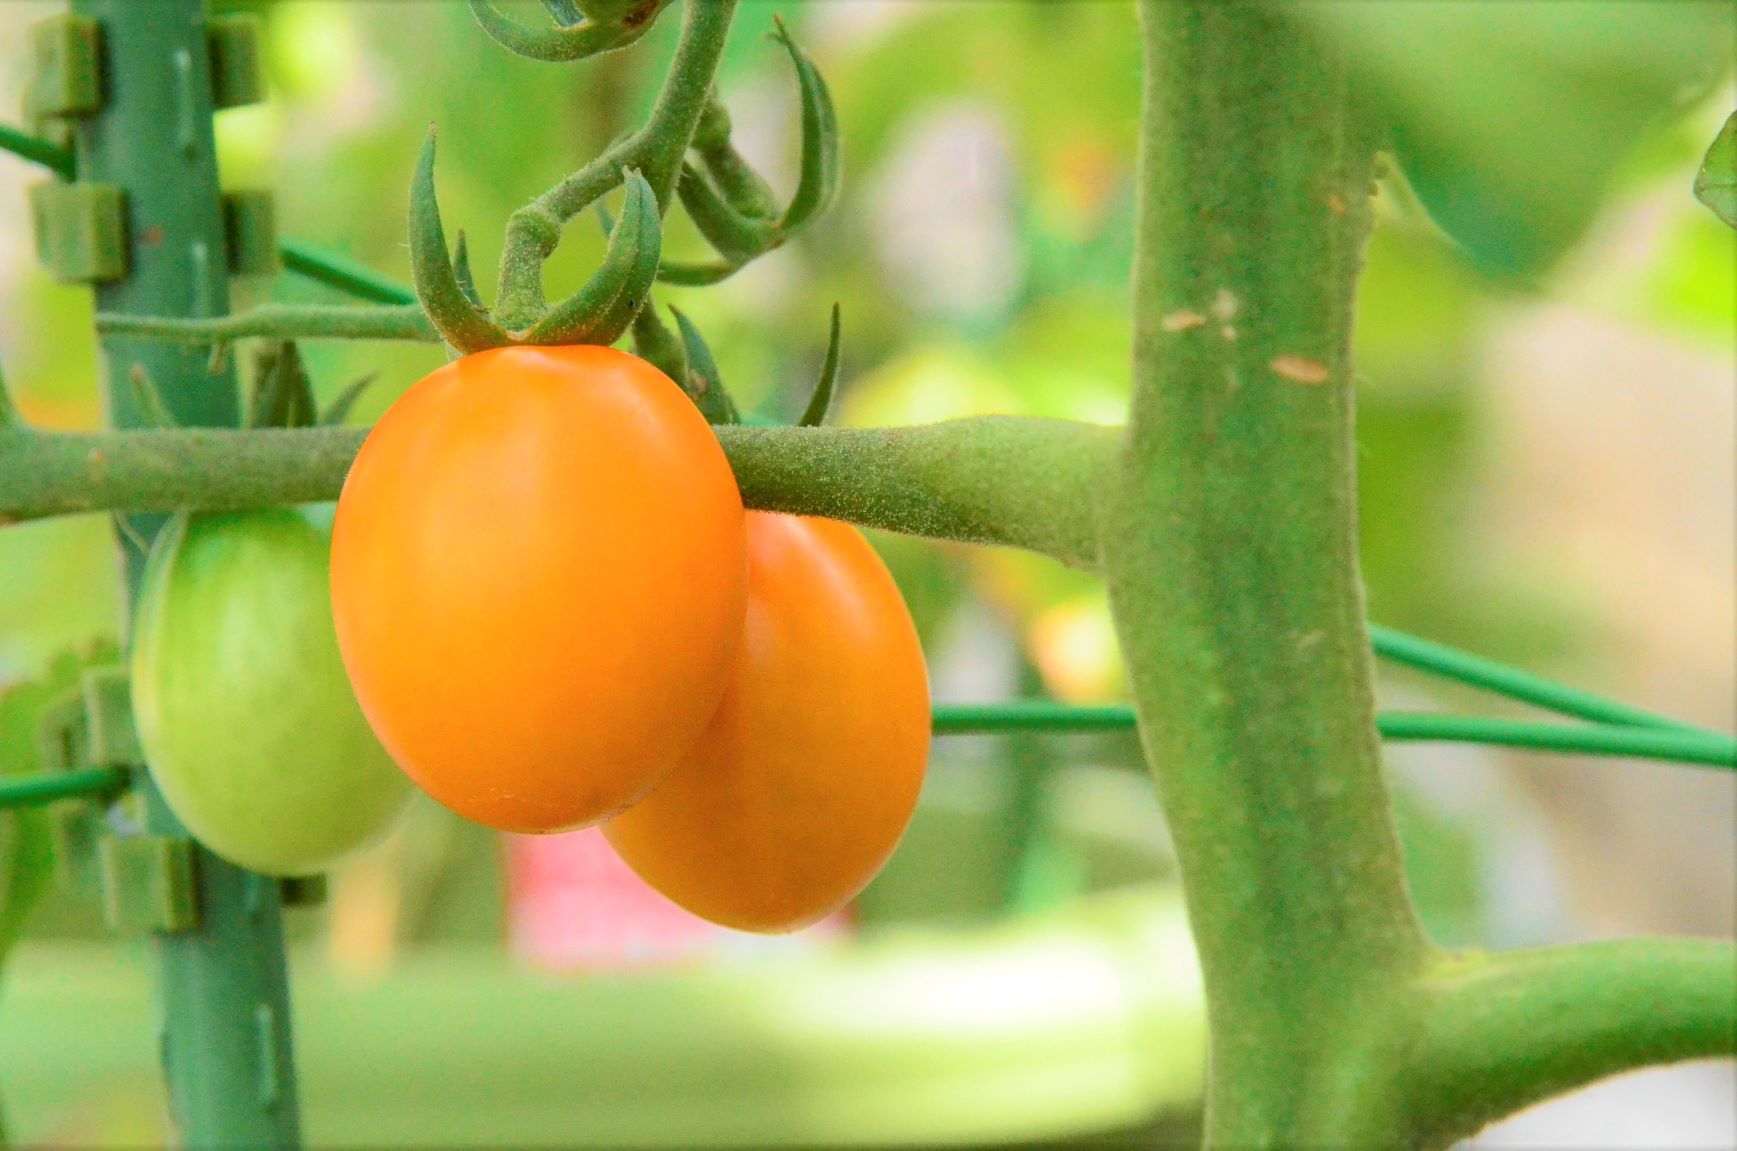 We were able to harvest yellow mini tomatoes